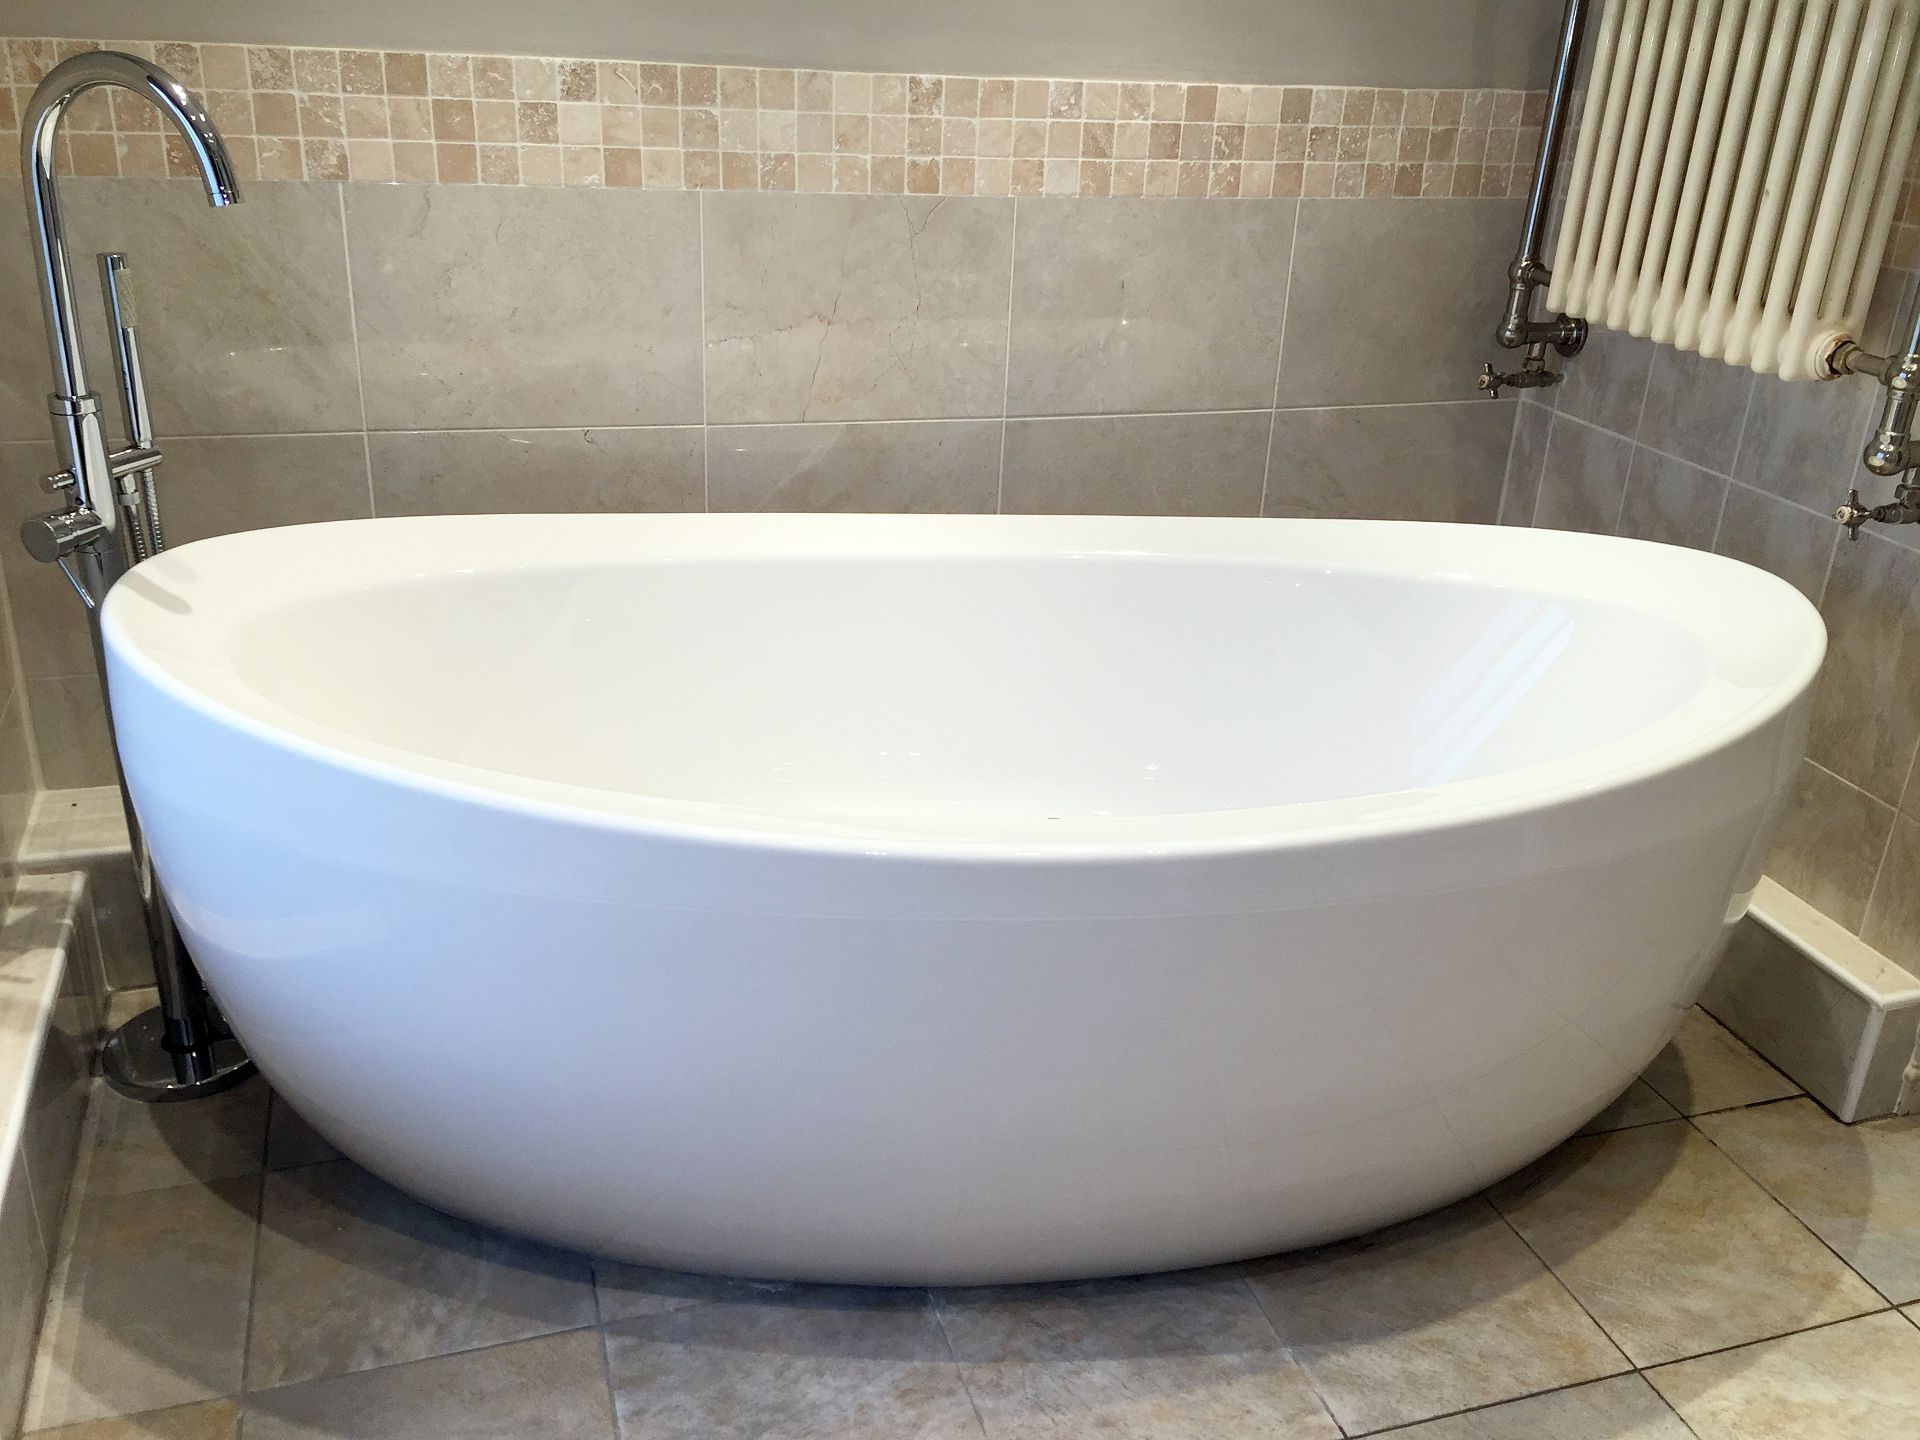 1 x Bath With A Floor Mounted Bath Filler Tap - Preowned In Good Condition - More Information To